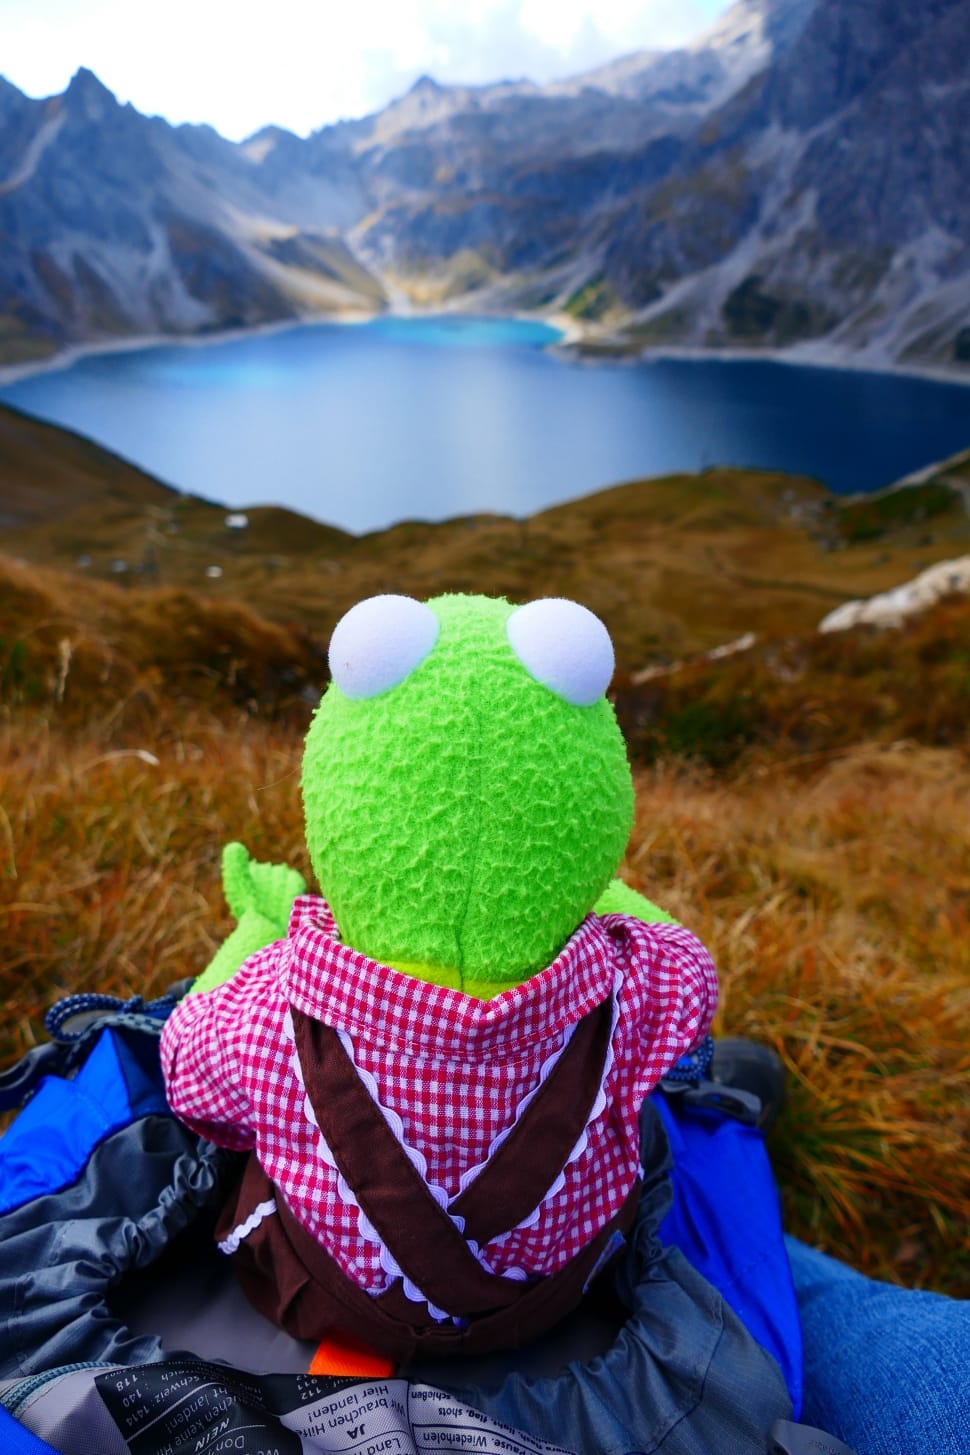 kermit the frog plush toy near blue body of water surrounded by mountains during daytime preview